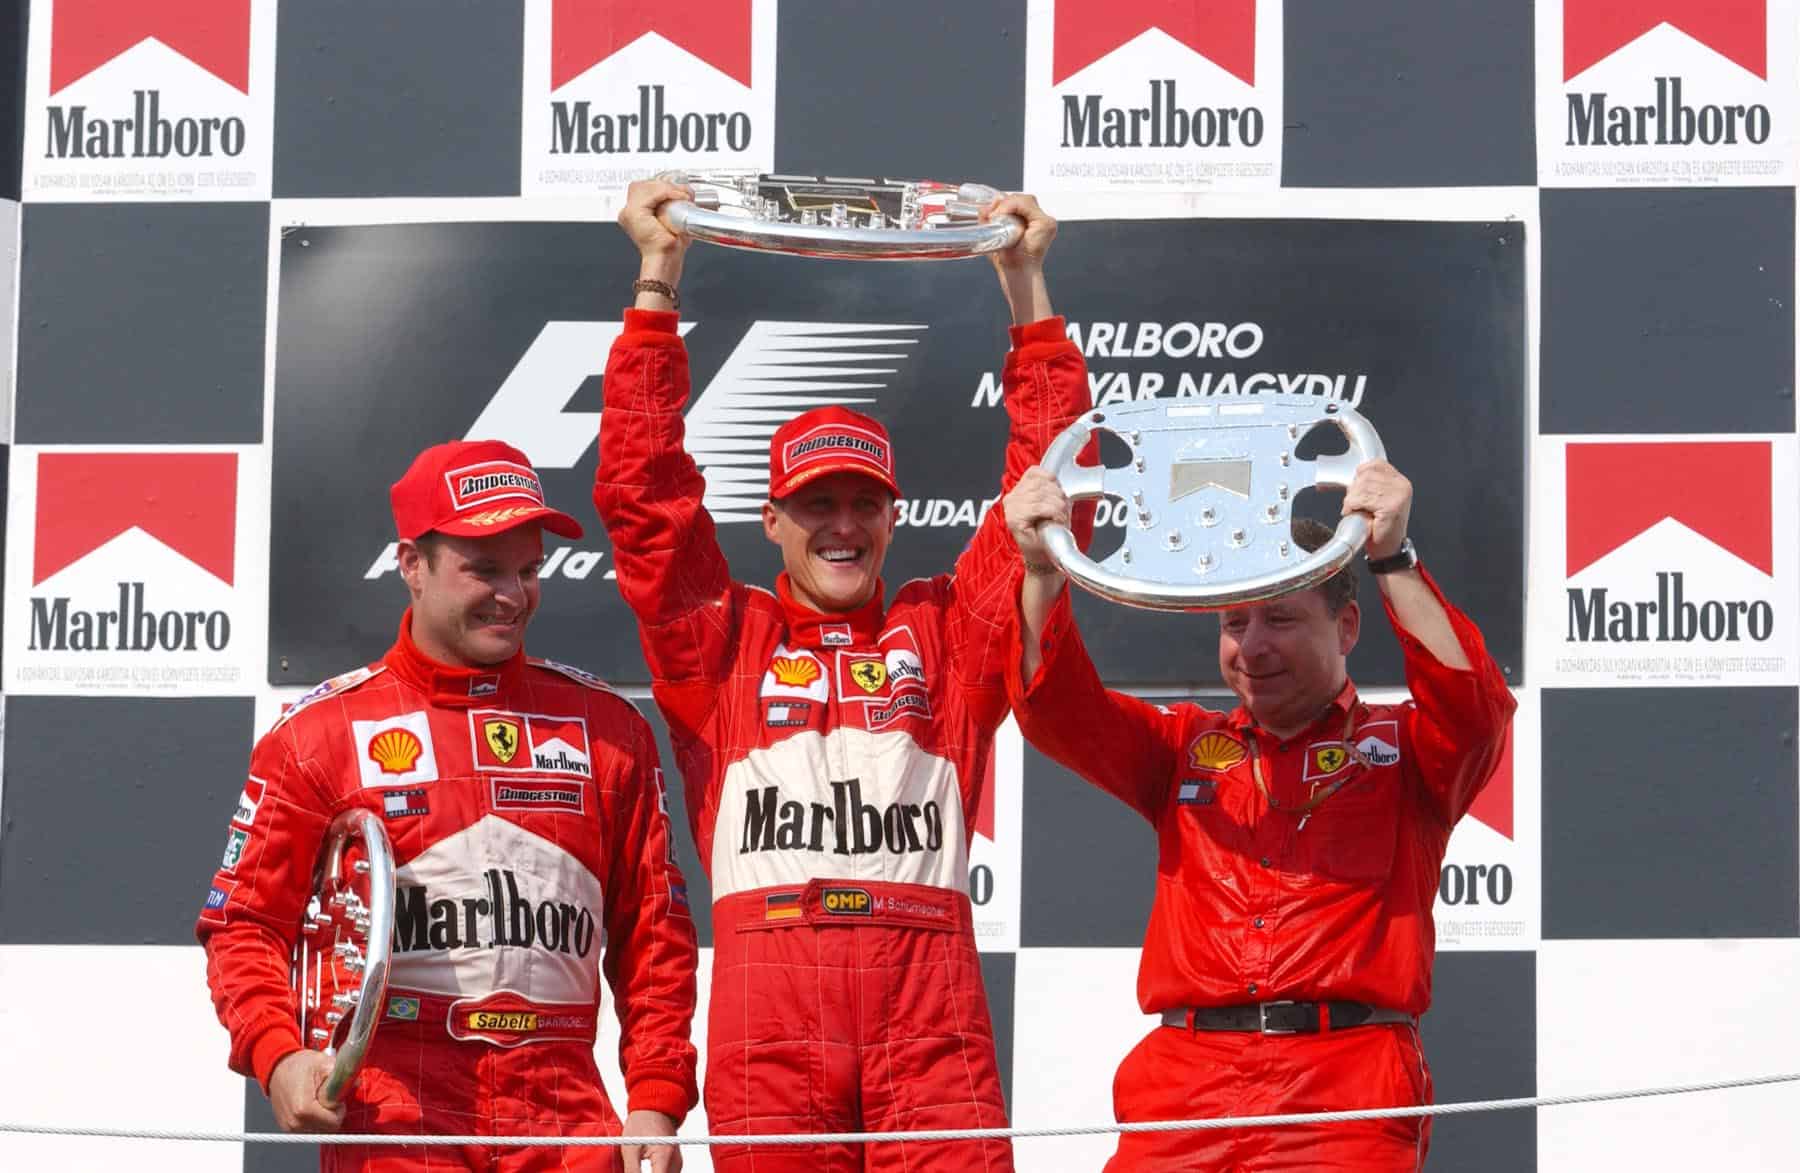 Rubens Barrichello explains why he couldn't visit Michael Schumacher after skiing accident